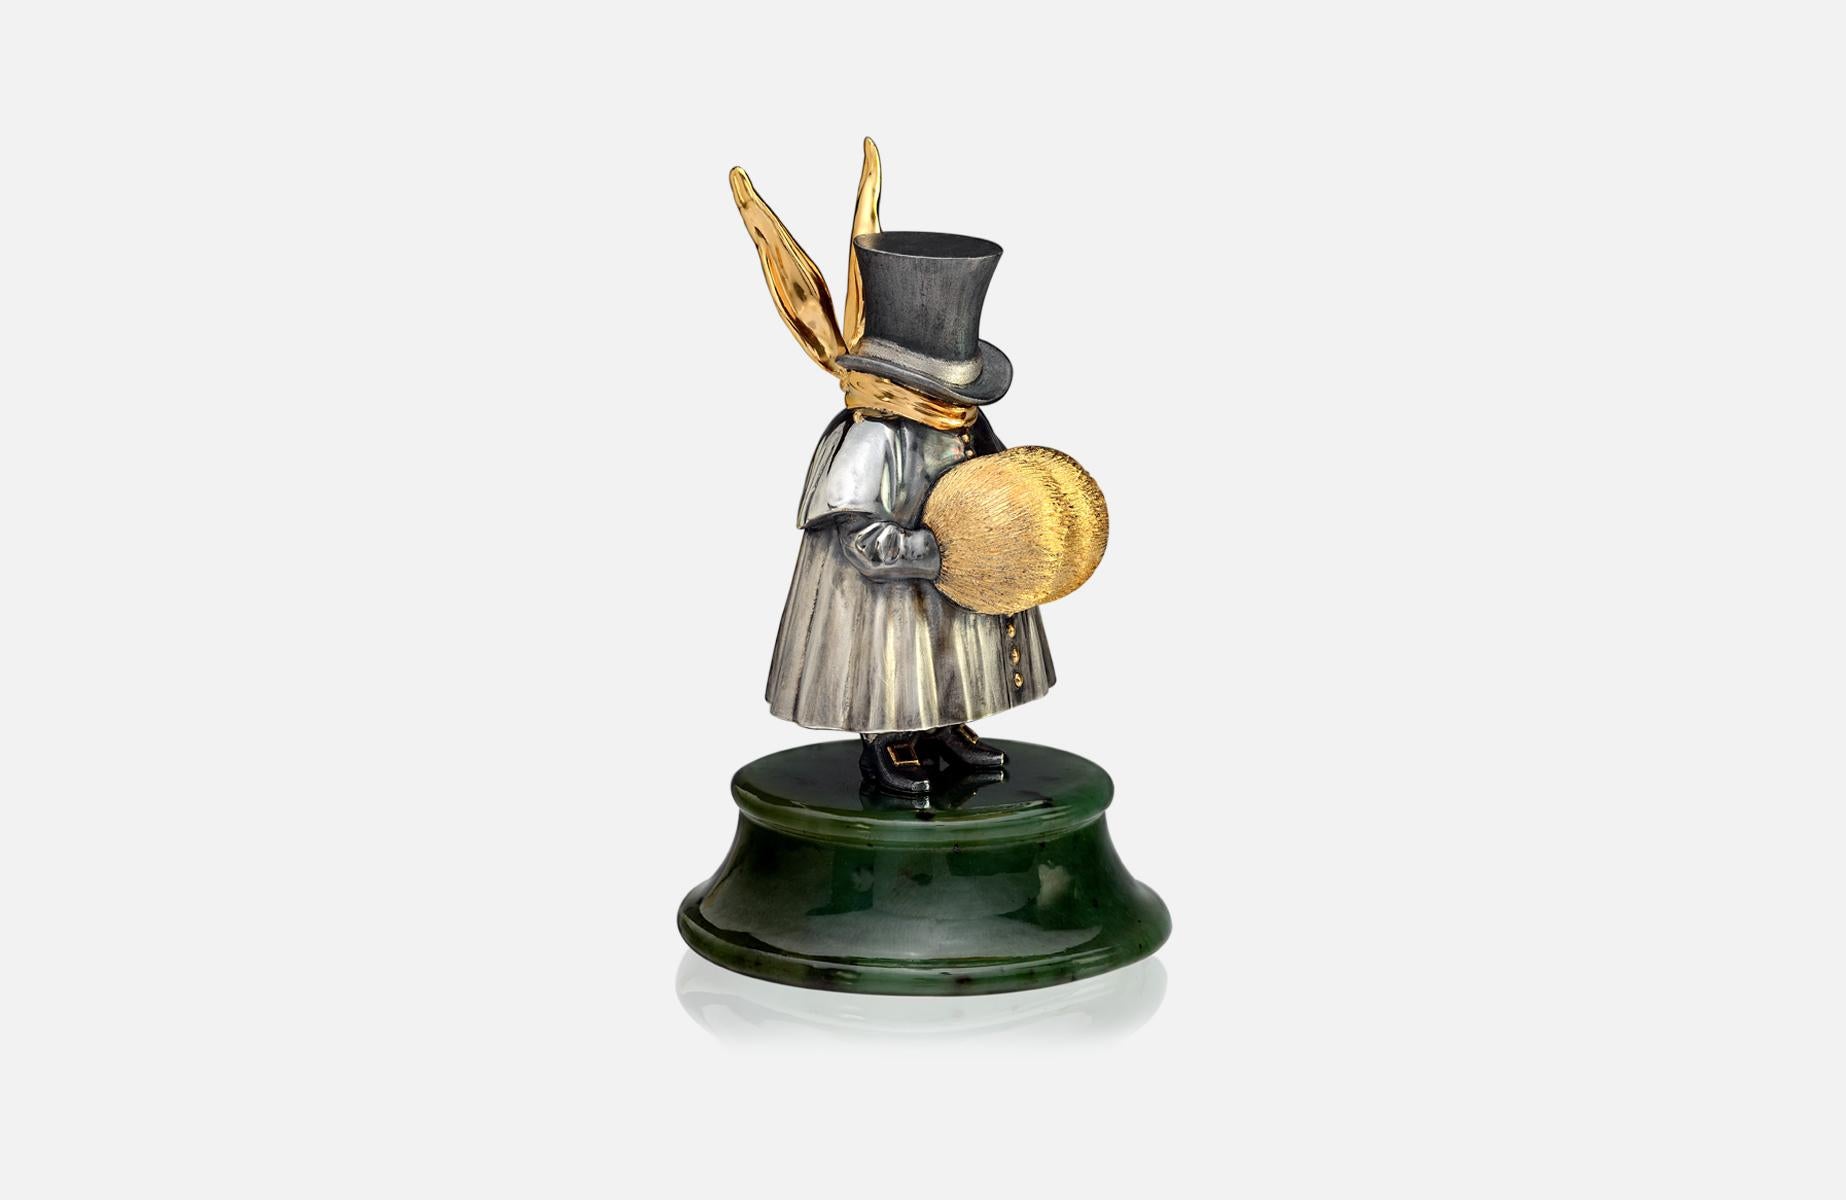 Original sterling silver 22k multiple sculpture with 24k gold plating, jade stand, stamped by the artist

Departing Guests. In a series of 12 figurines depicting simply the departing guests from a scene in The Nutcracker, Mihail Chemiakin has